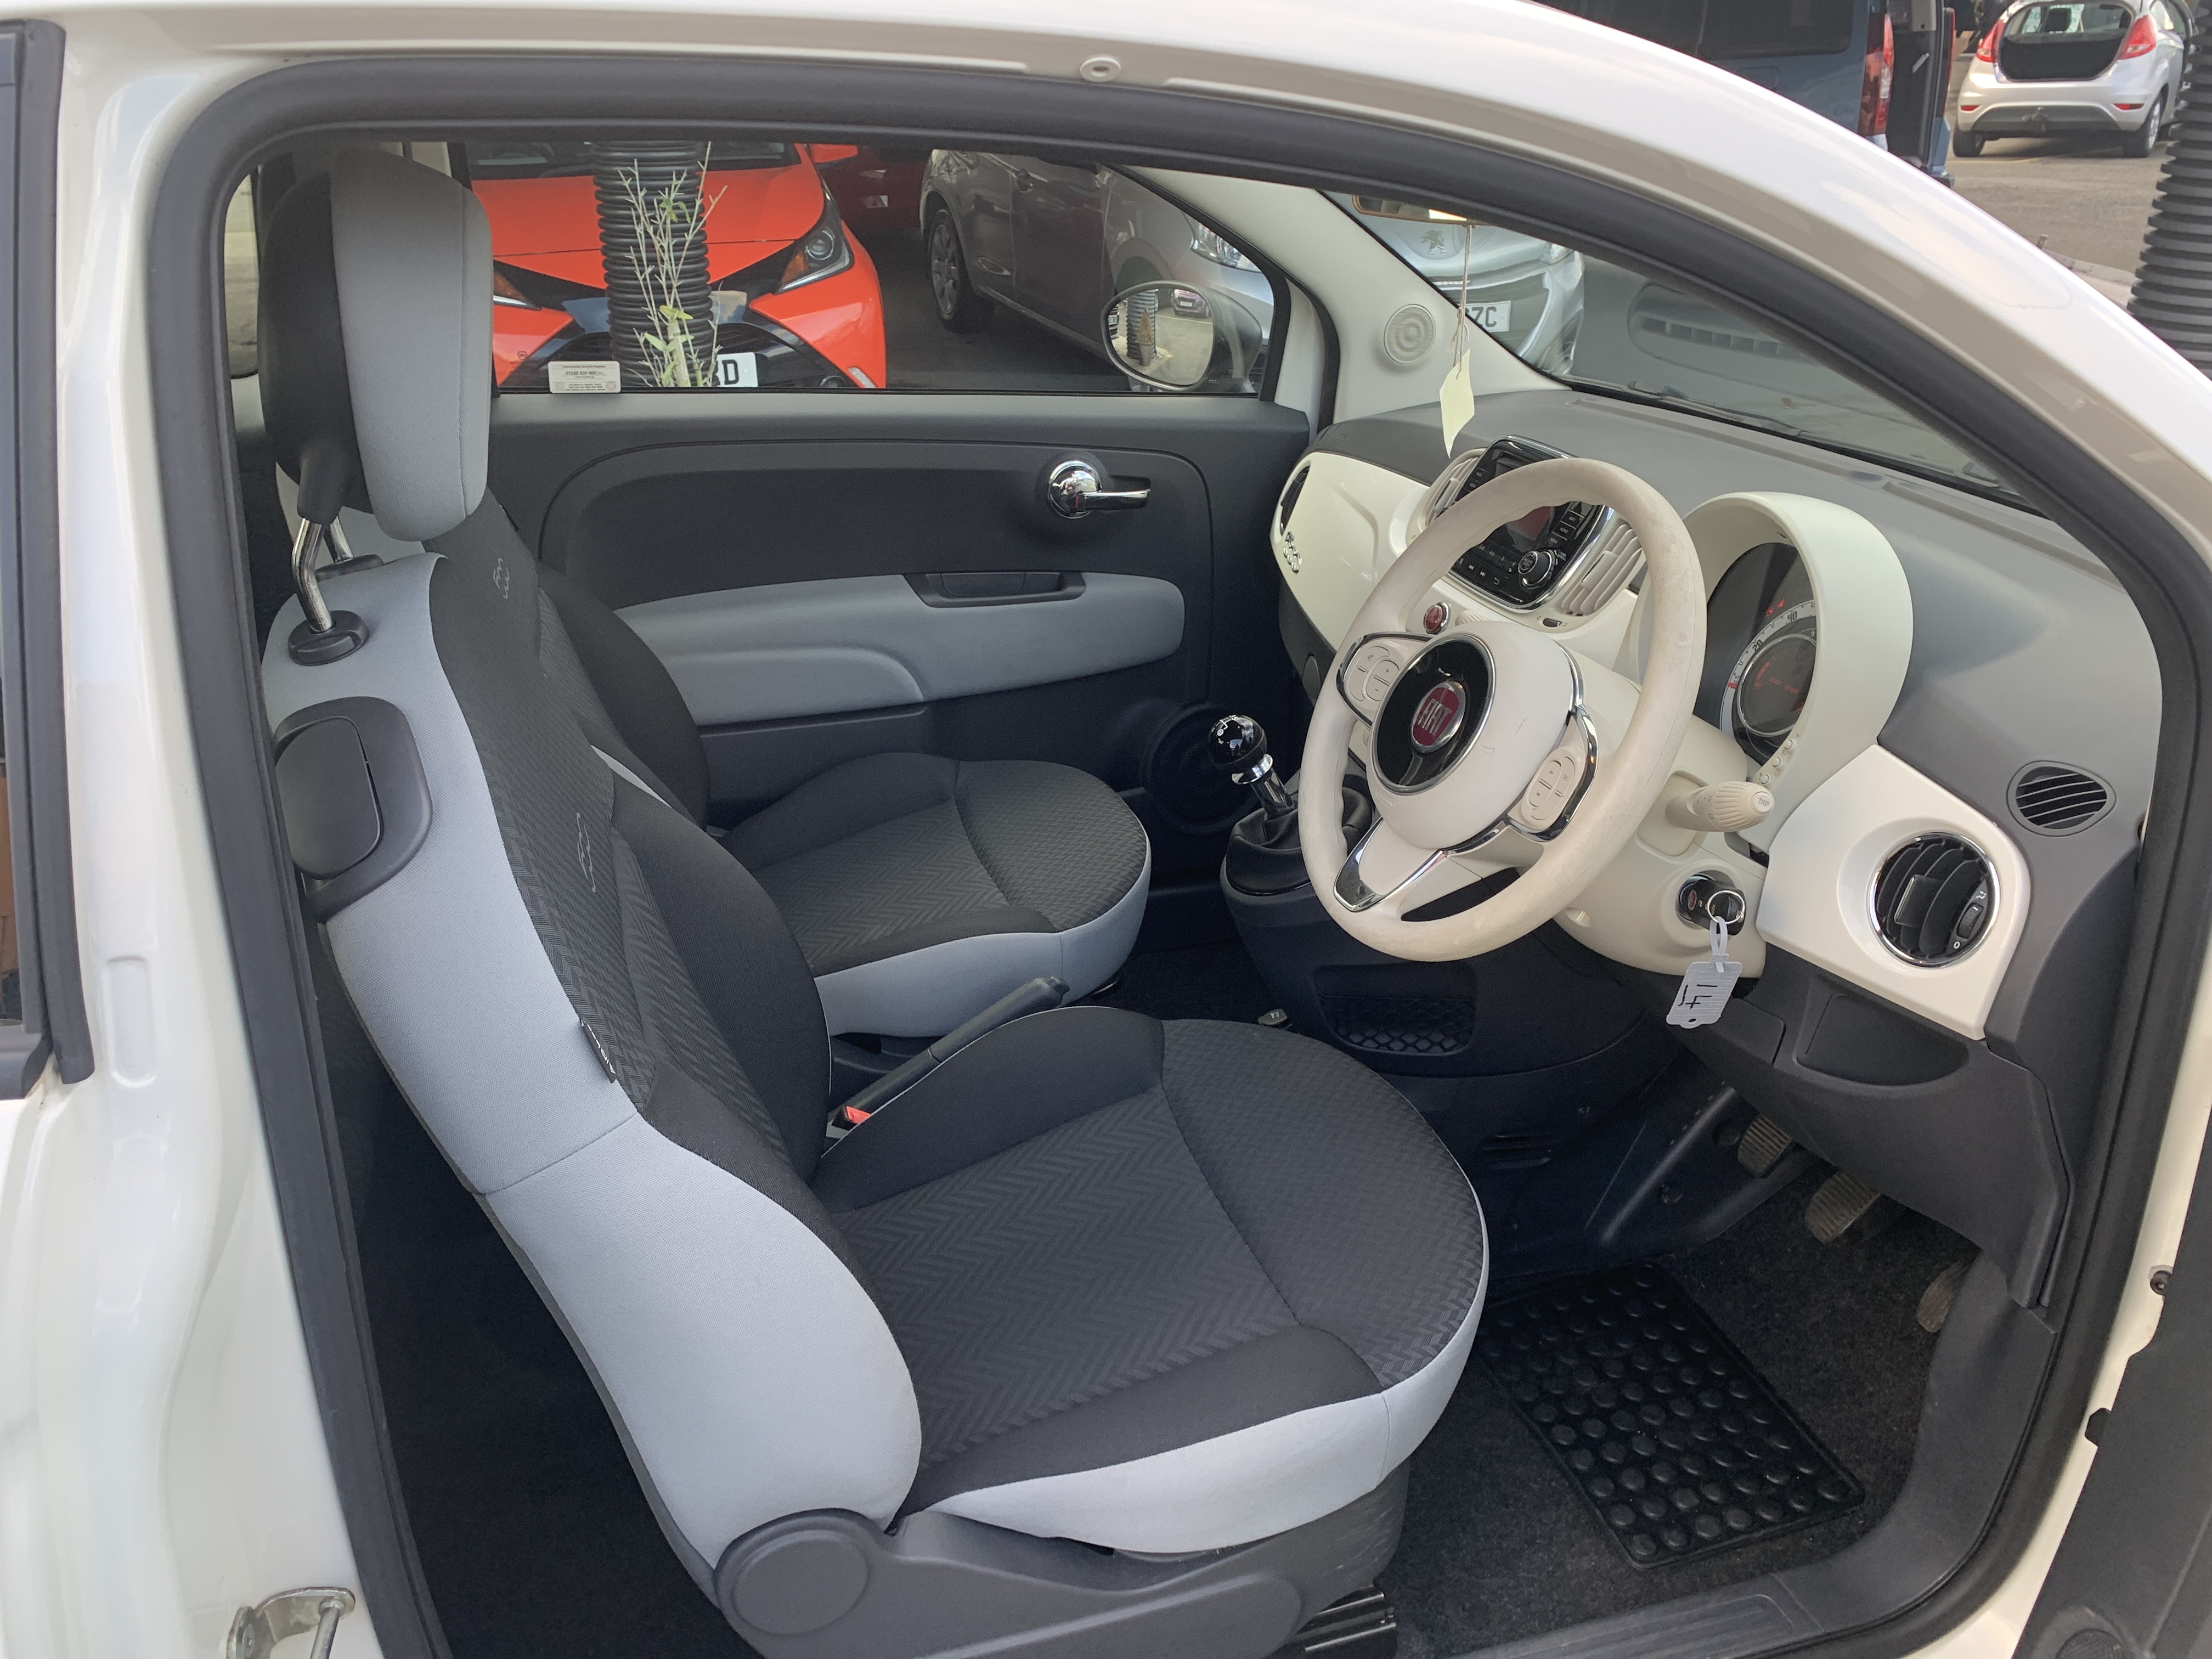 Fiat 500 POP  for sale at Mike Howlin Motor Sales Pembrokeshire